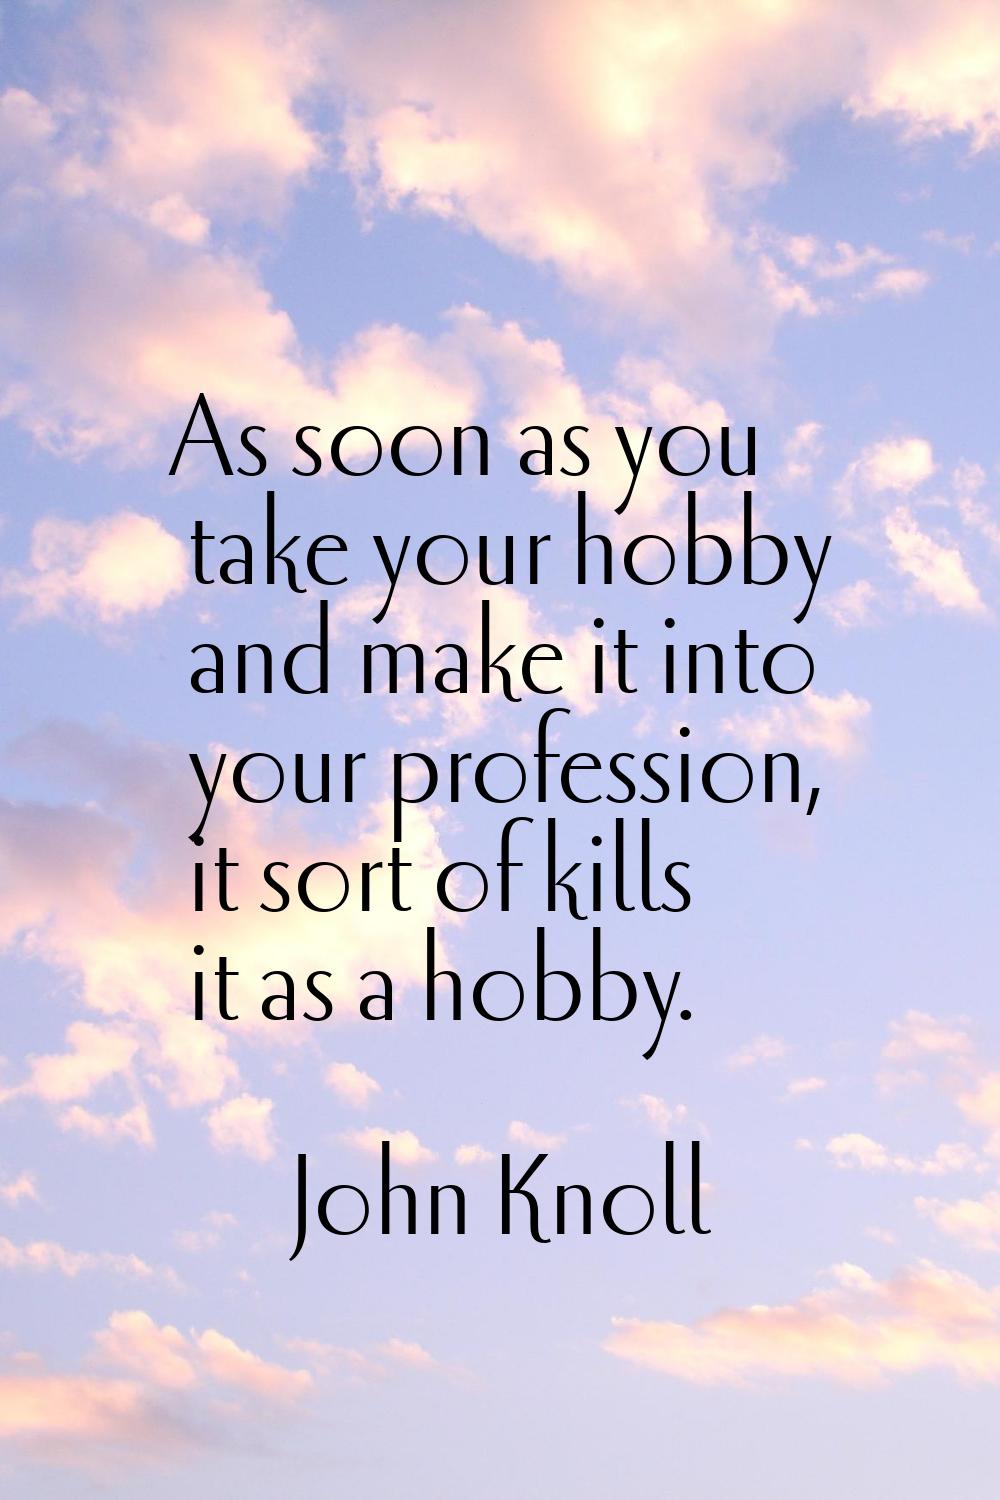 As soon as you take your hobby and make it into your profession, it sort of kills it as a hobby.